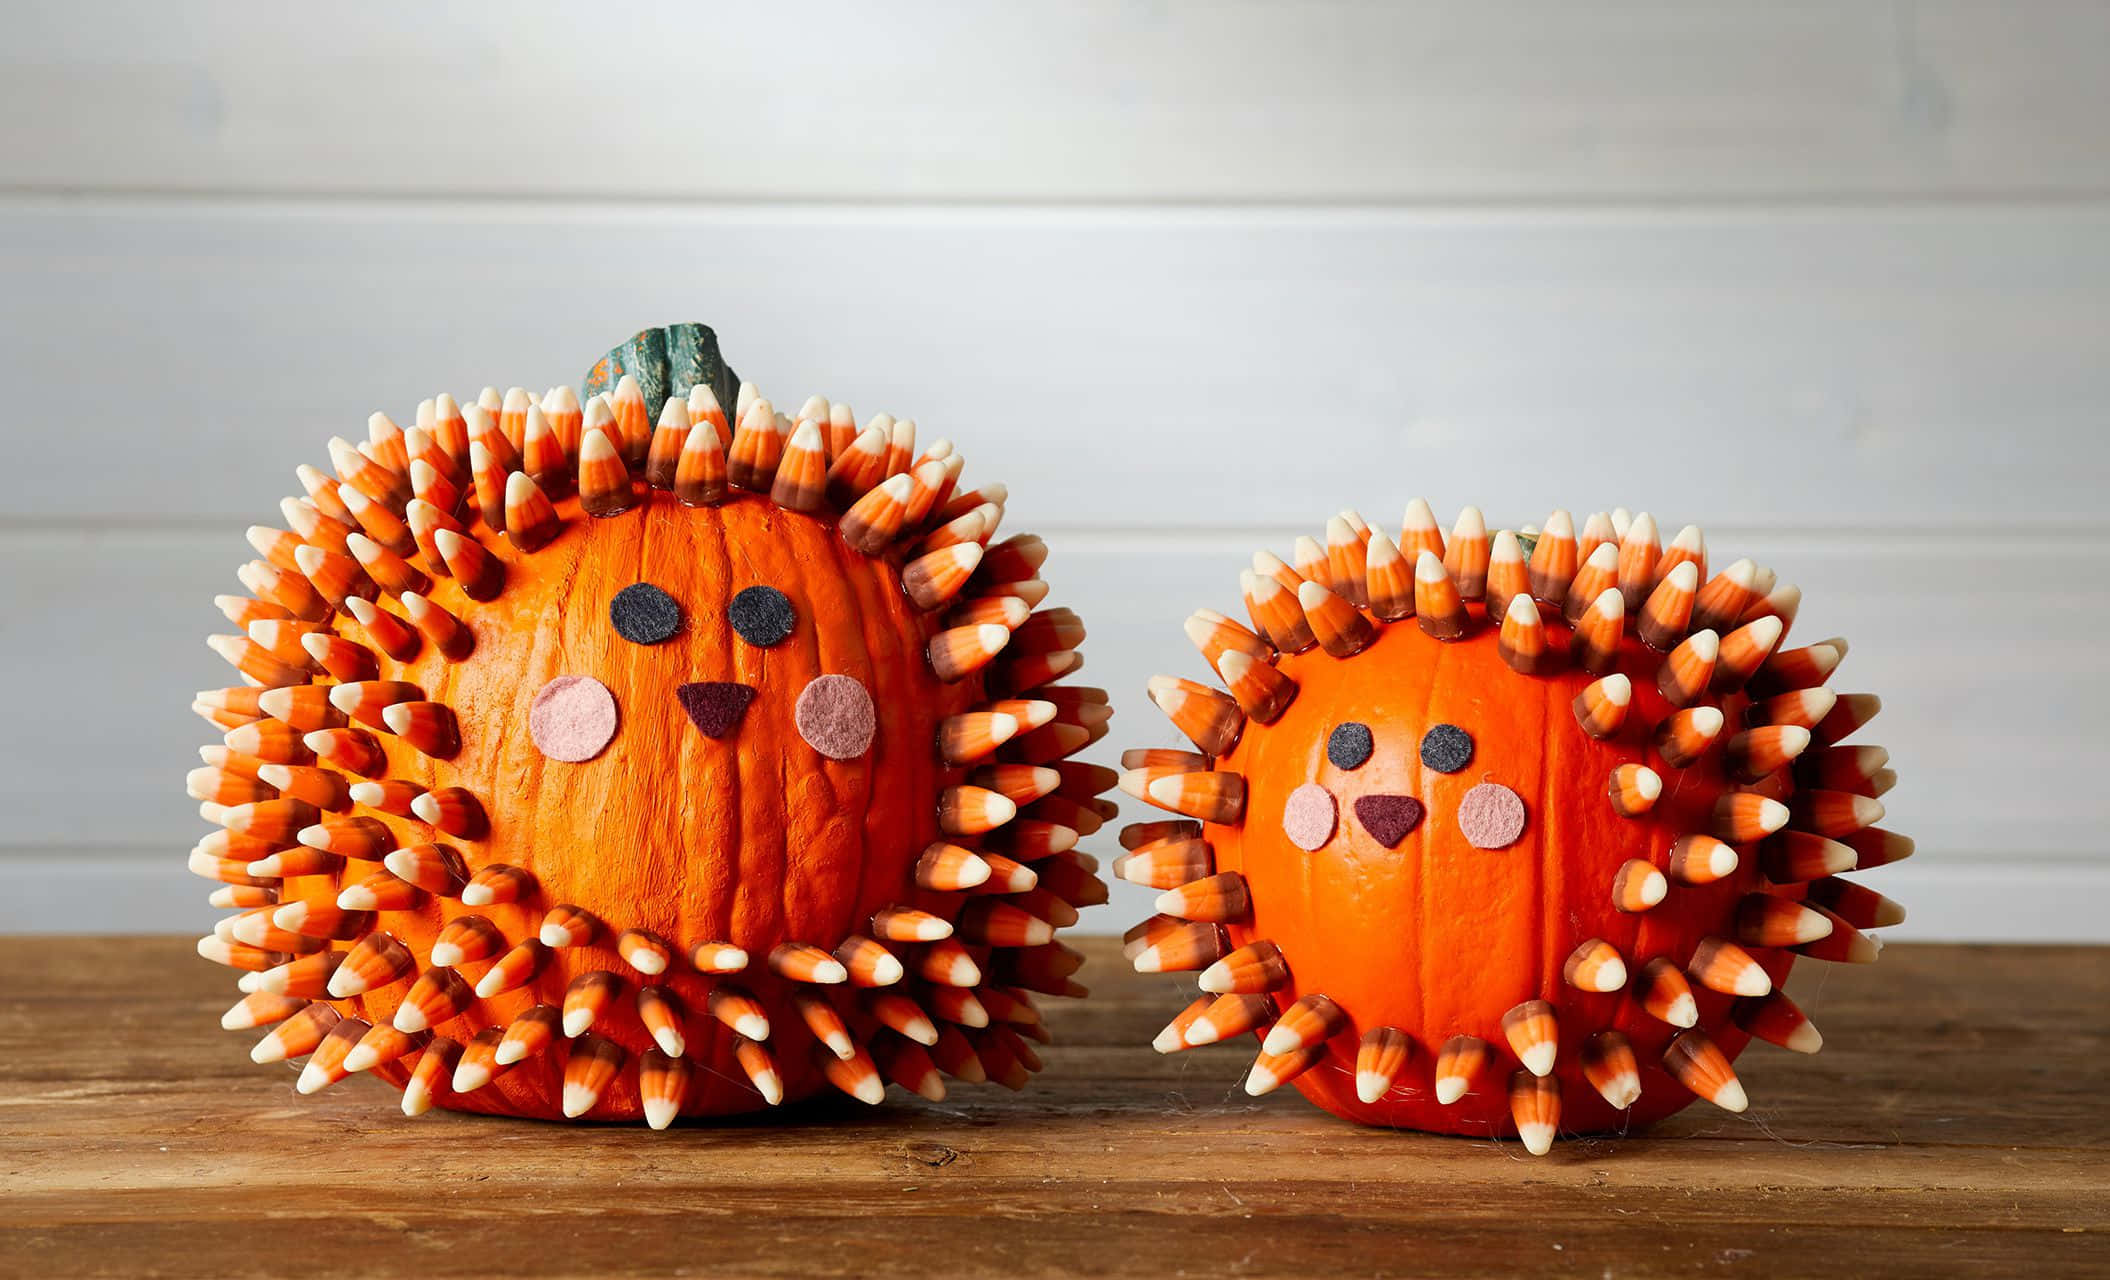 Get creative this Halloween with spooky DIY crafts Wallpaper